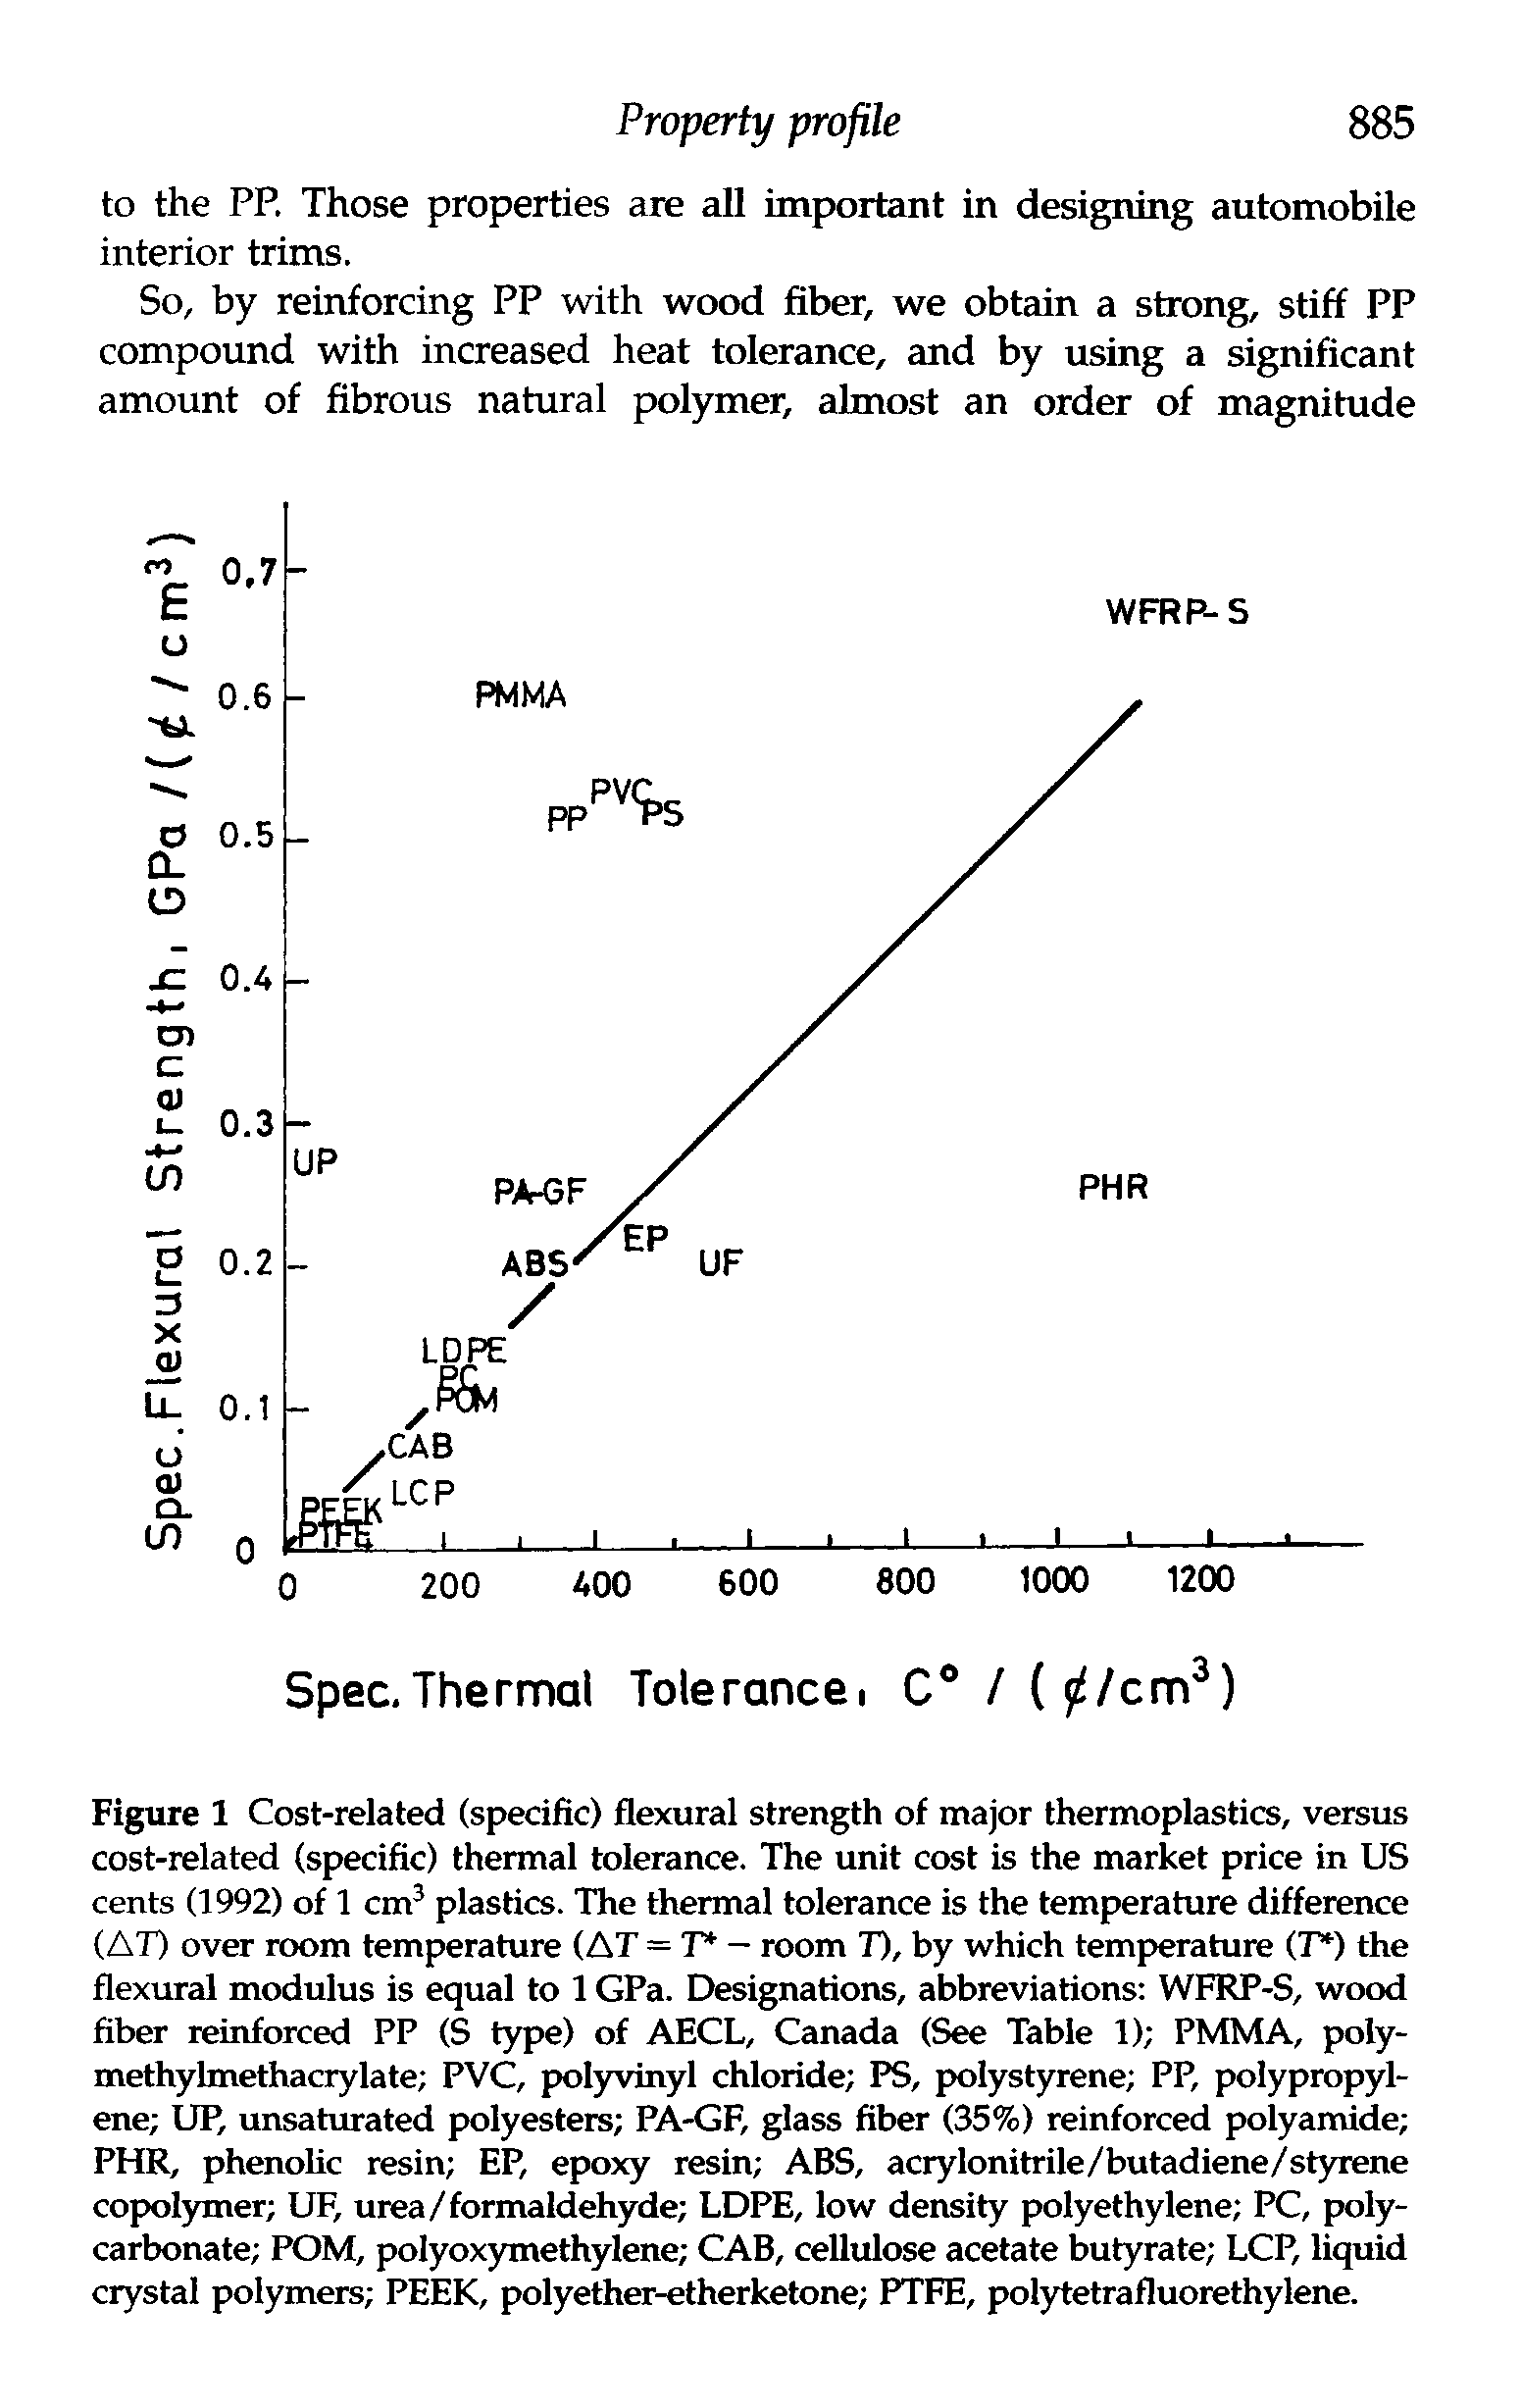 Figure 1 Cost-related (specific) flexural strength of major thermoplastics, versus cost-related (specific) thermal tolerance. The unit cost is the market price in US cents (1992) of 1 cm plastics. The thermal tolerance is the temperature difference (AT) over room temperature (AT — T - room T), by which temperature (7 ) the flexural modulus is equal to 1 GPa. Designations, abbreviations WFRP-S, wood fiber reinforced PP (S type) of AECL, Canada (See Table 1) PMMA, polymethylmethacrylate PVC, pol)winyl chloride PS, polystyrene PP, polypropylene UP, unsaturated polyesters PA-GF, glass fiber (35%) reinforced polyamide PHR, phenolic resin EP, epoxy resin ABS, acrylonitrile/butadiene/styrene copolymer UF, urea/formaldehyde LDPE, low density polyethylene PC, polycarbonate POM, polyoxymethylene CAB, cellulose acetate butyrate LCP, liquid crystal polymers PEEK, polyether-etherketone PTFE, polytetrafluorethylene.